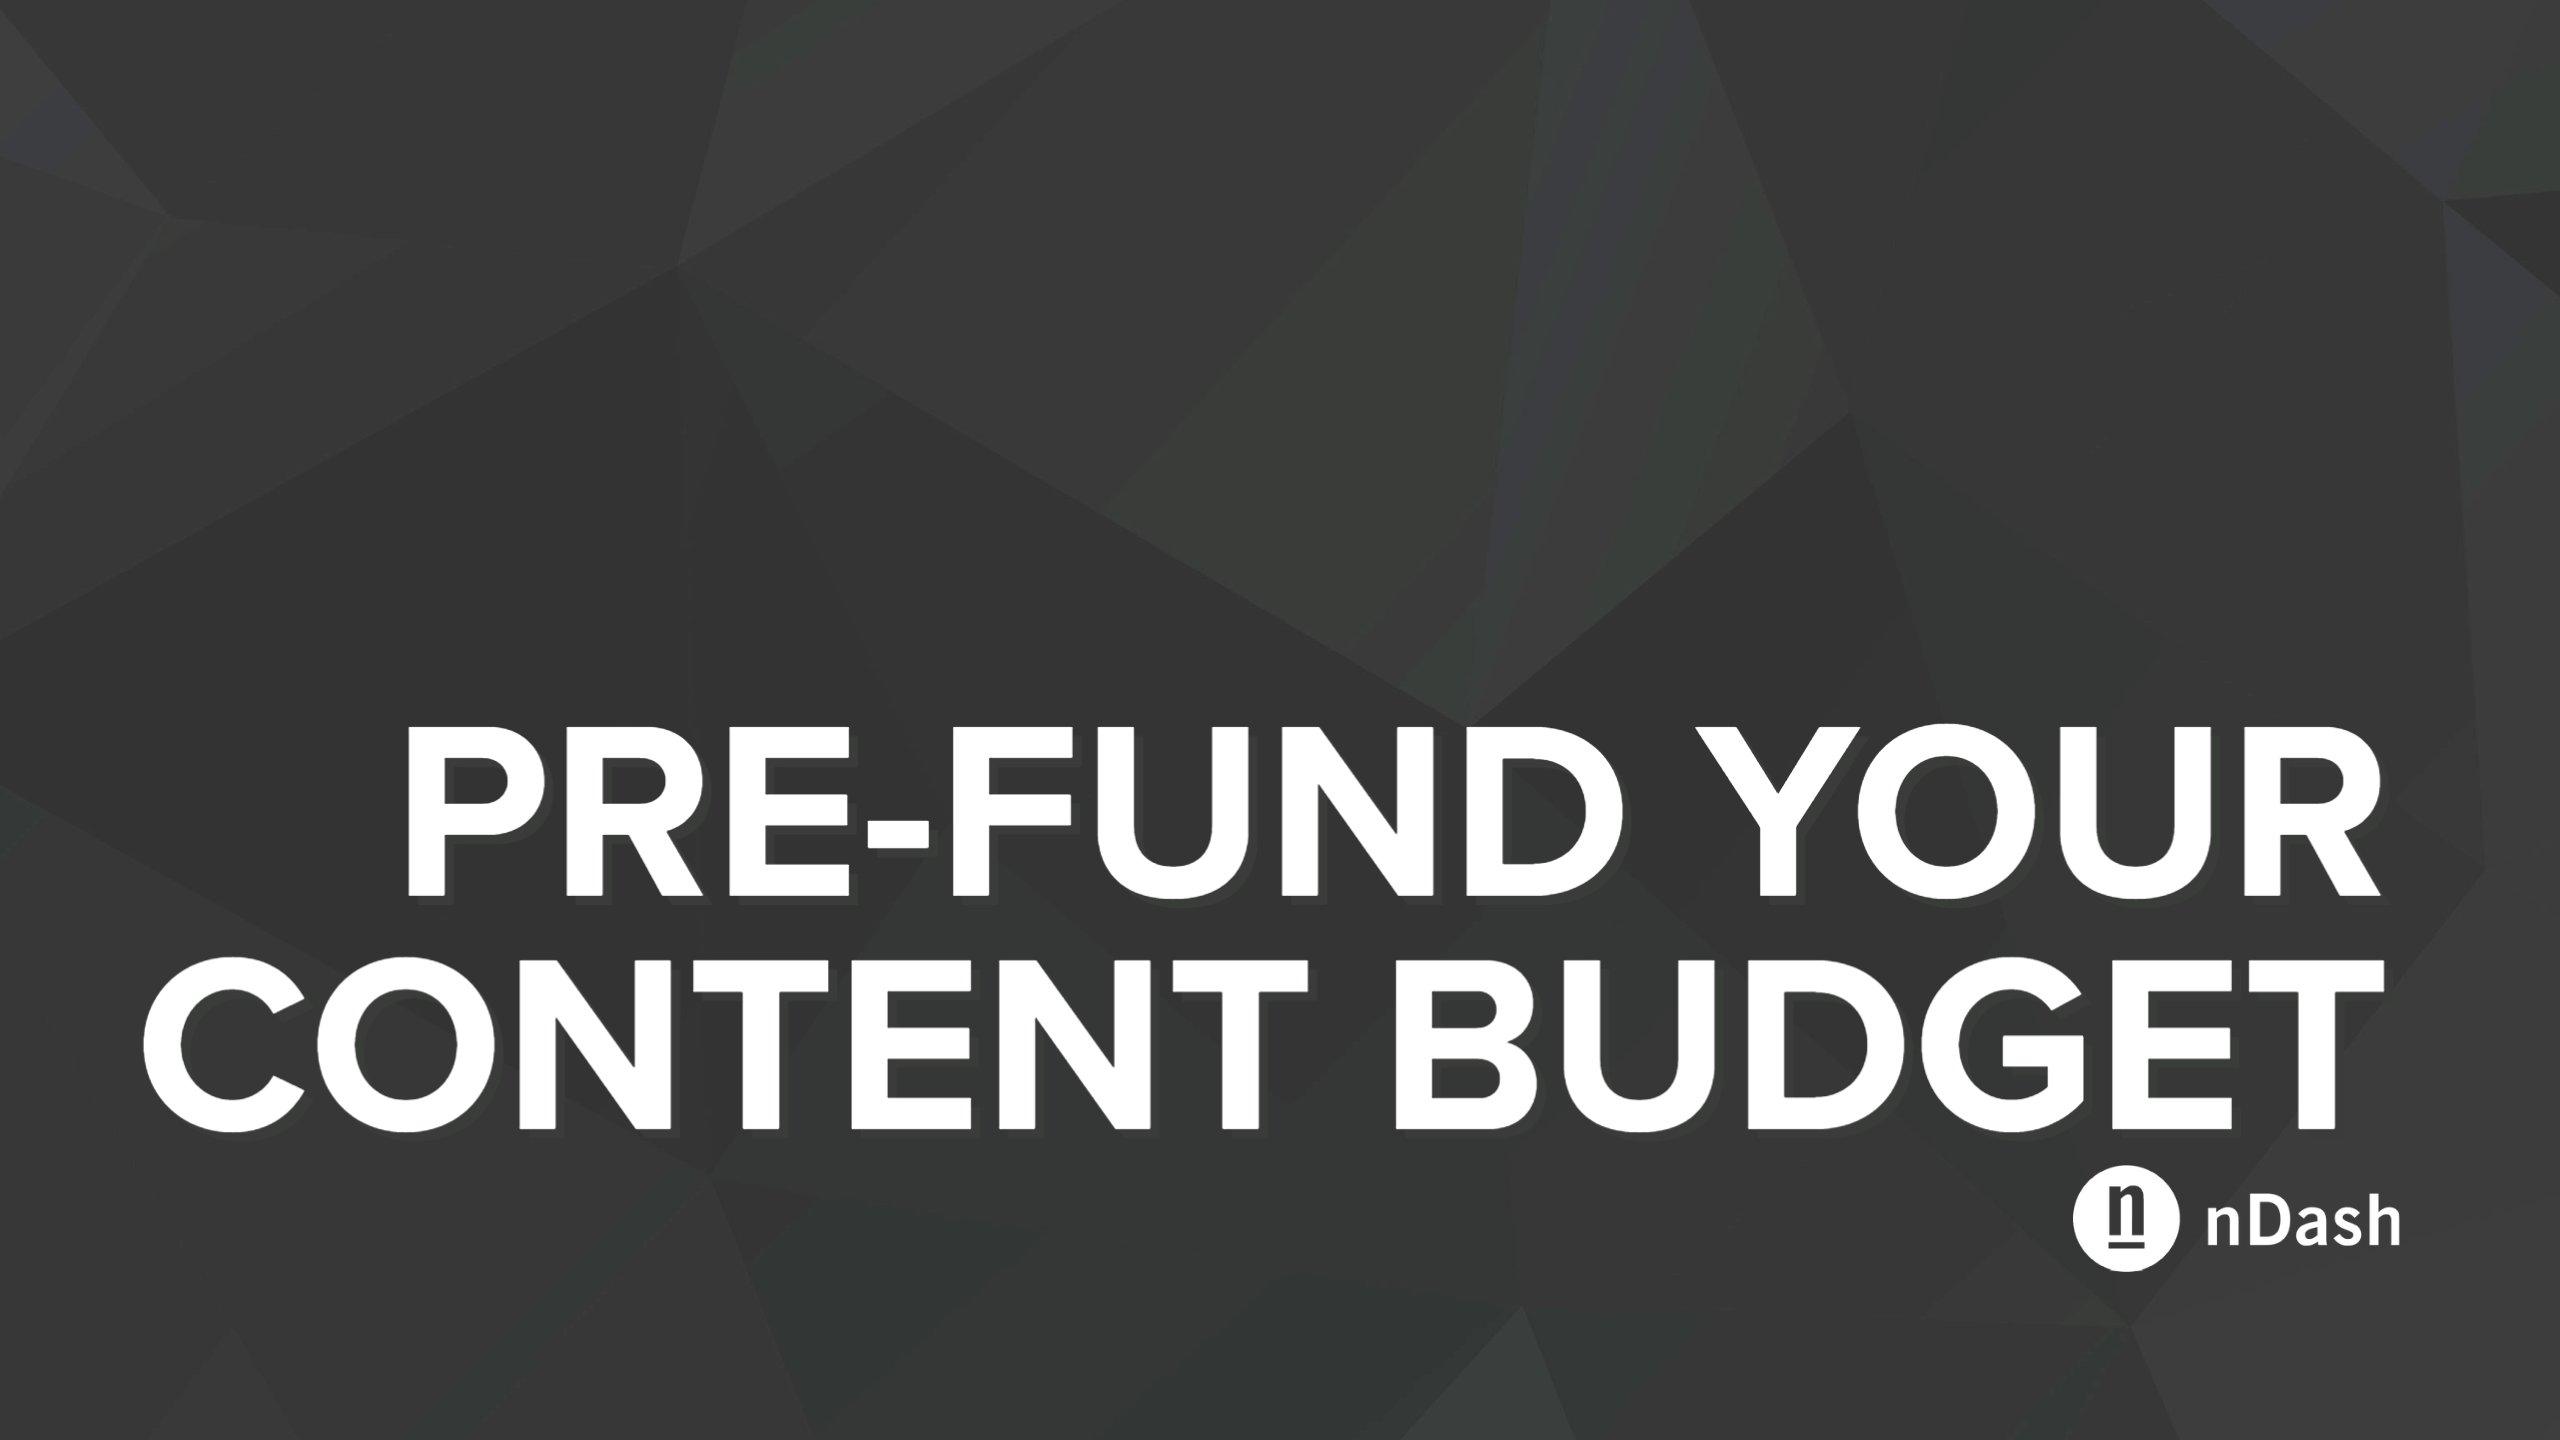 Leftover Marketing Budgets? Fund Your Account!